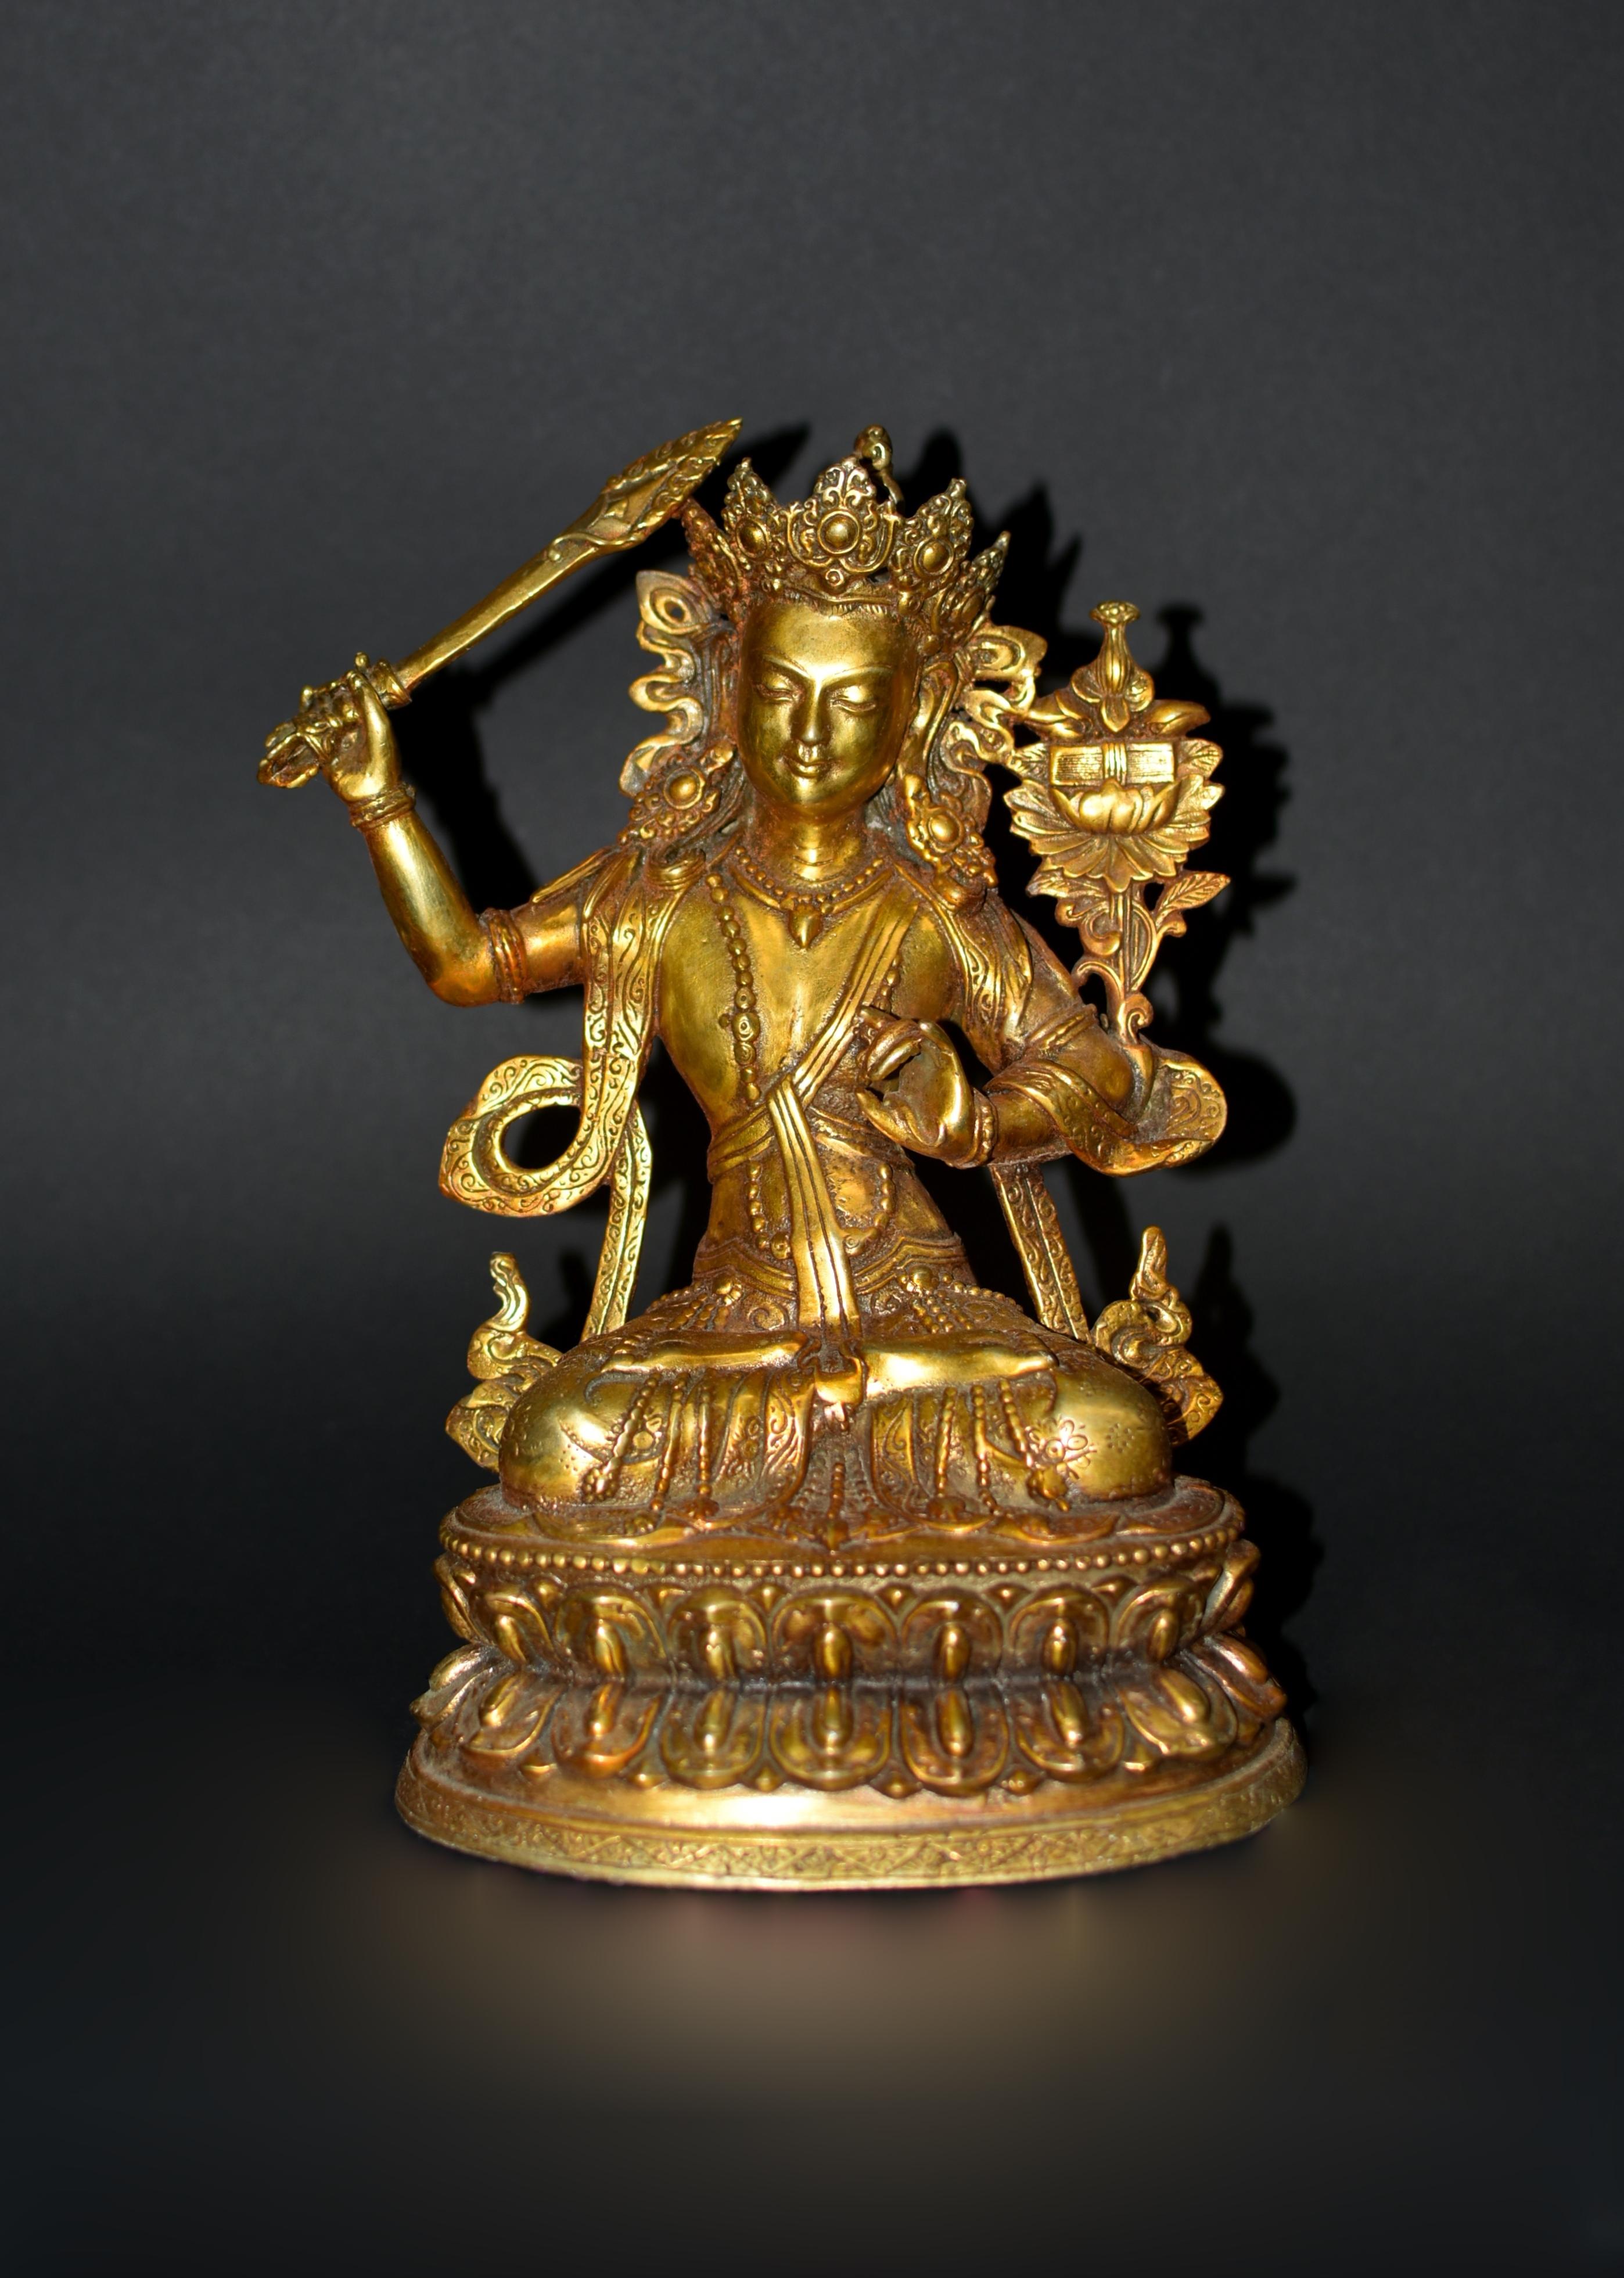 A beautiful gilt bronze, 4.6 lb, statue of Tibetan Bodhisattva Manjushree. Seated in vajrasana on a double lotus throne, in his right hand the sword of wisdom and his left hand in jnana mudra, gesture of teaching. Adorned with jewels and dressed in